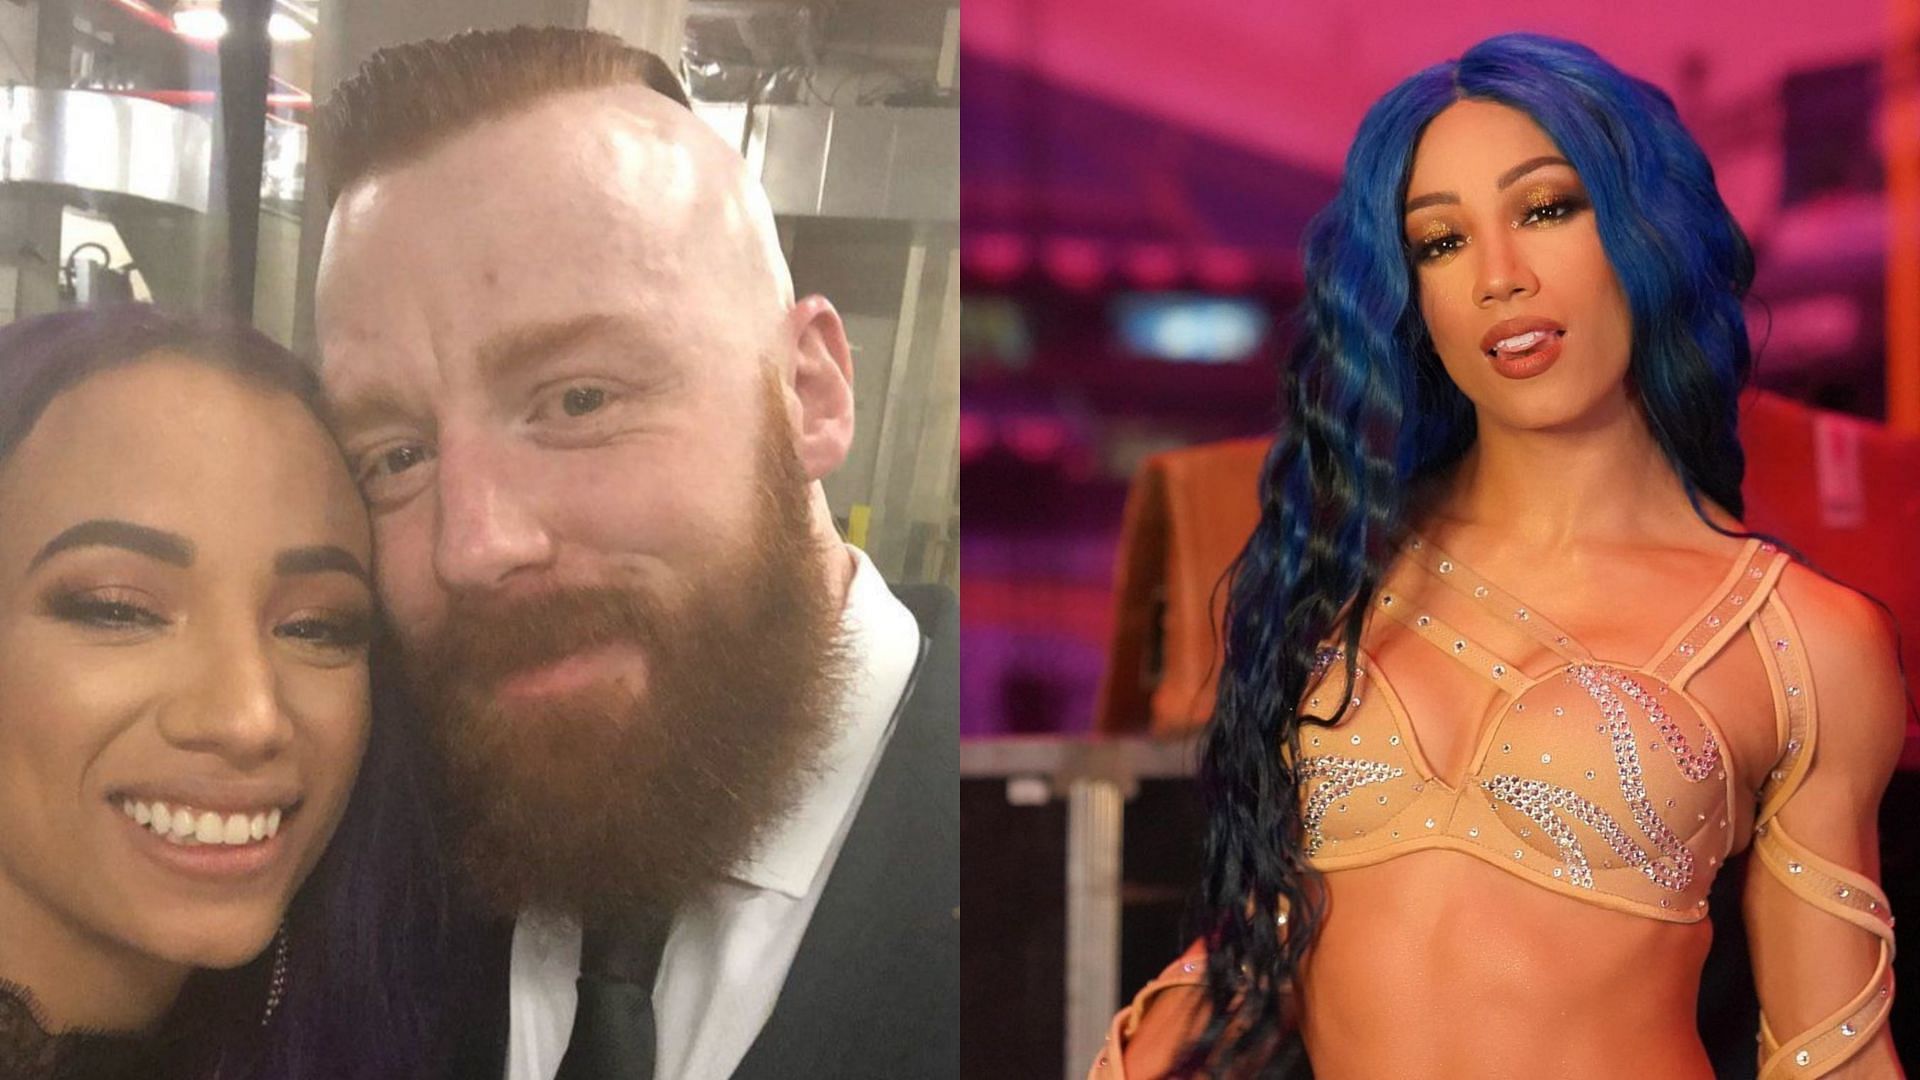 Sasha Banks and Sheamus have a good friendship outside the ring